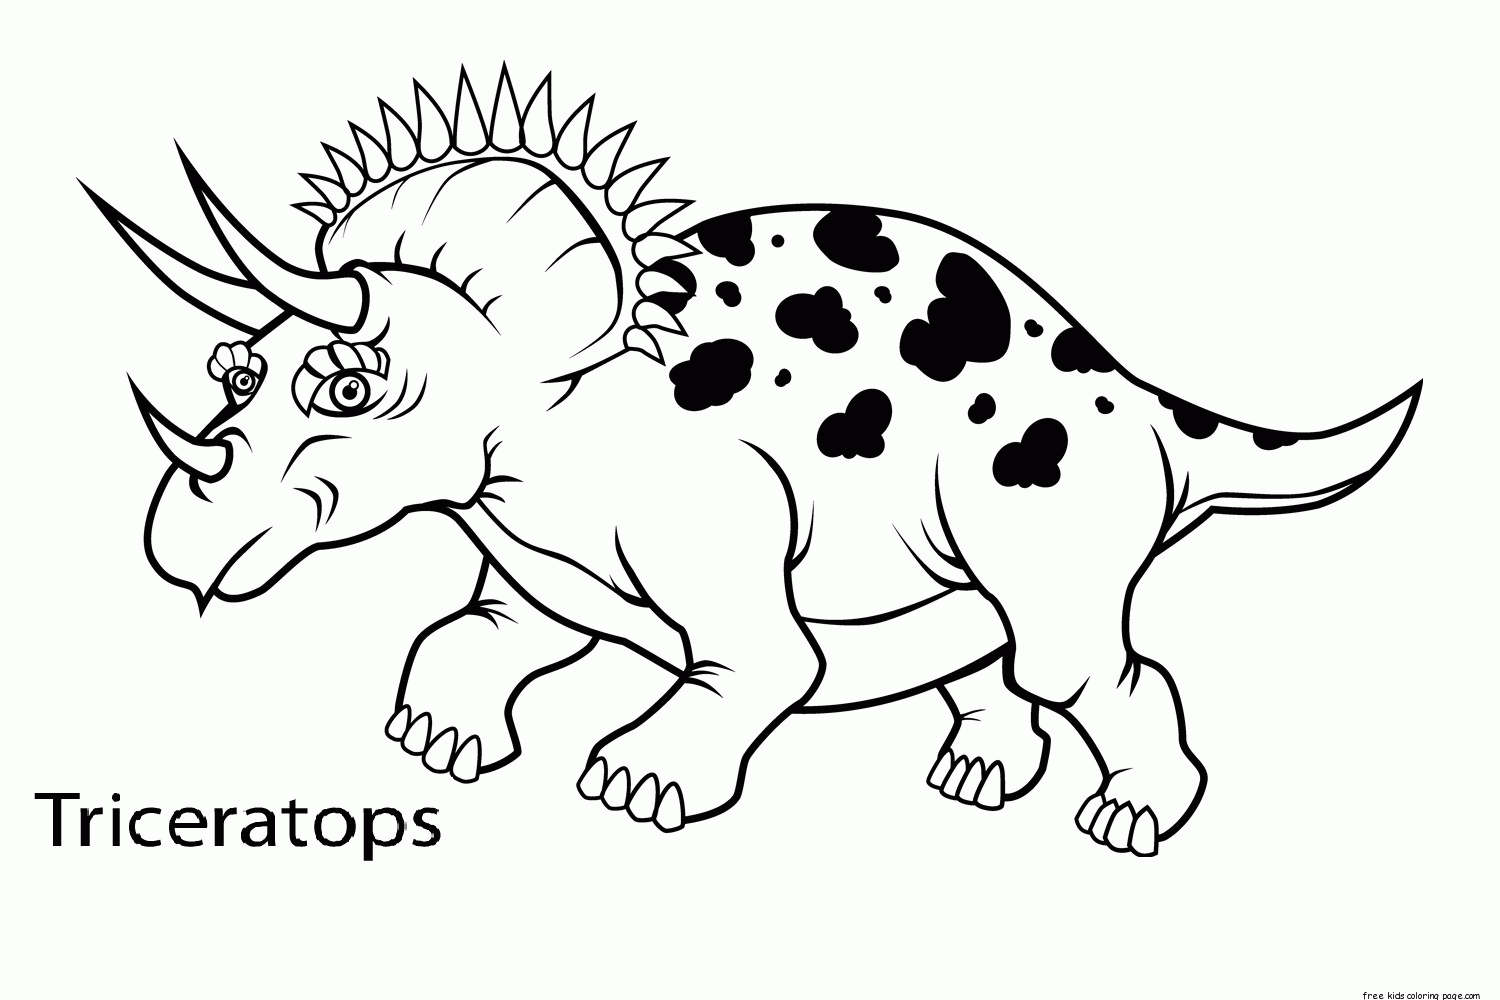 free-dinosaur-coloring-pages-for-preschoolers-download-free-dinosaur-coloring-pages-for